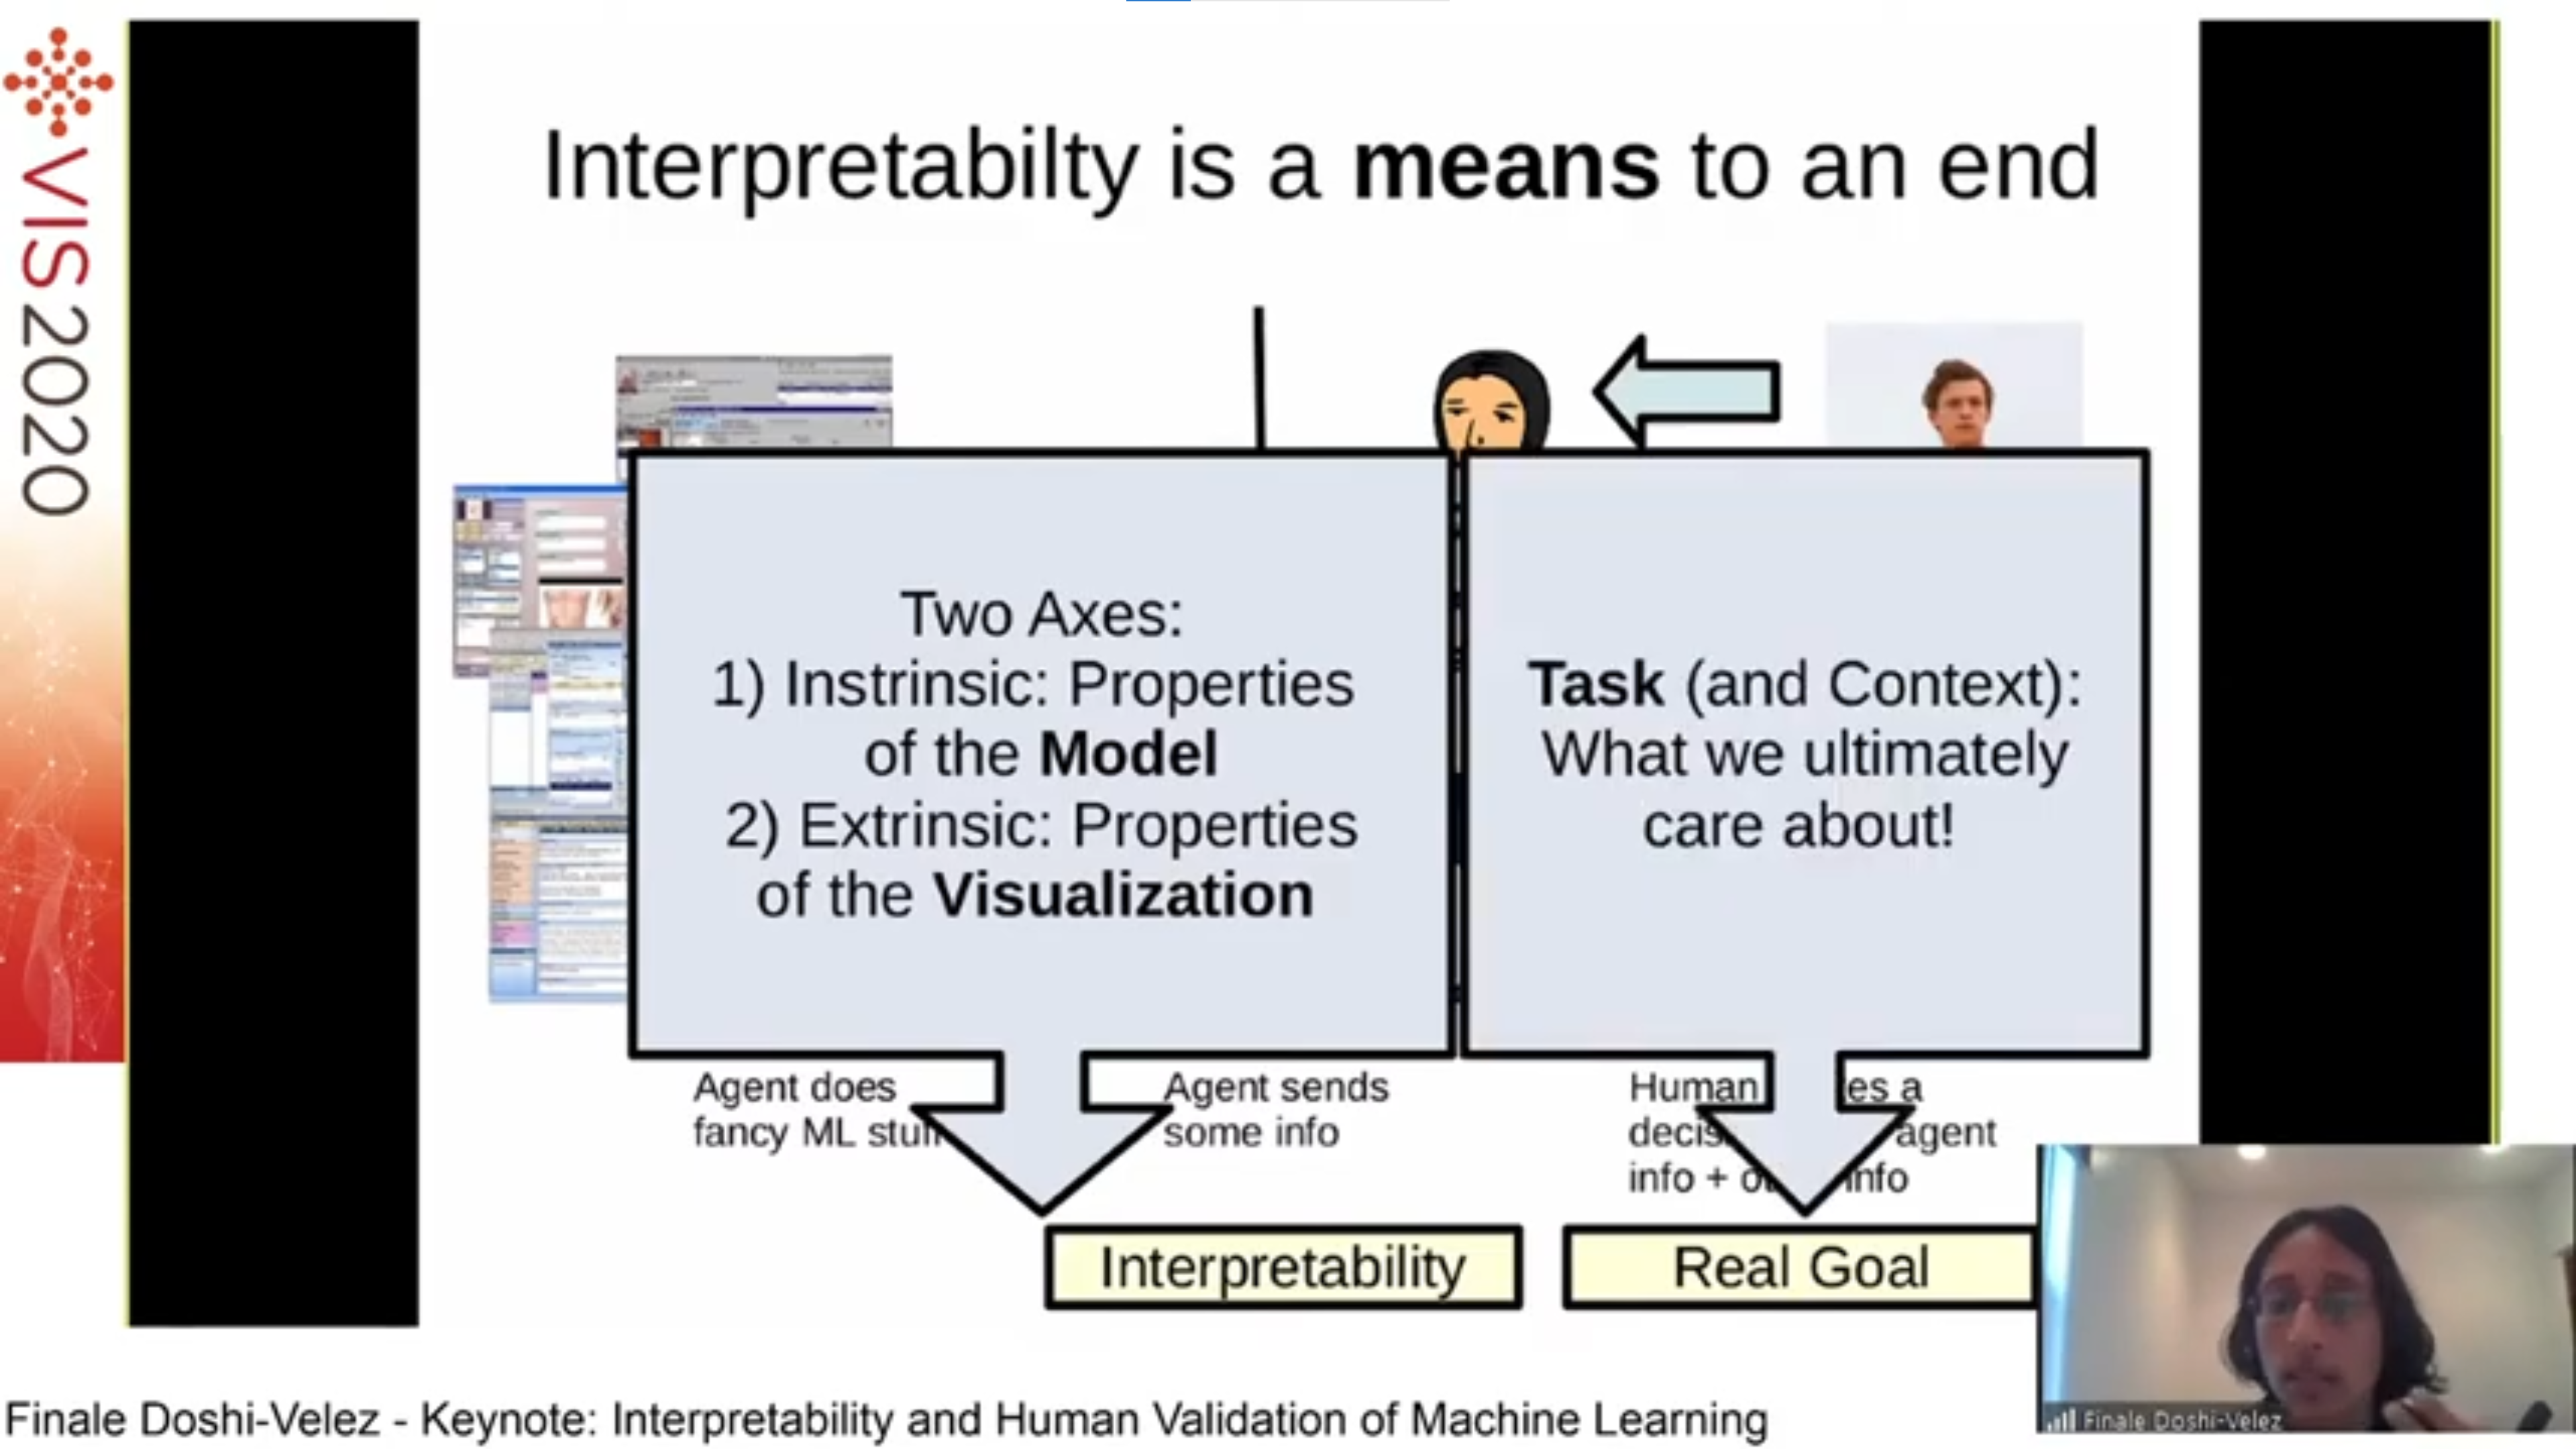 Interpretability is a means to an end